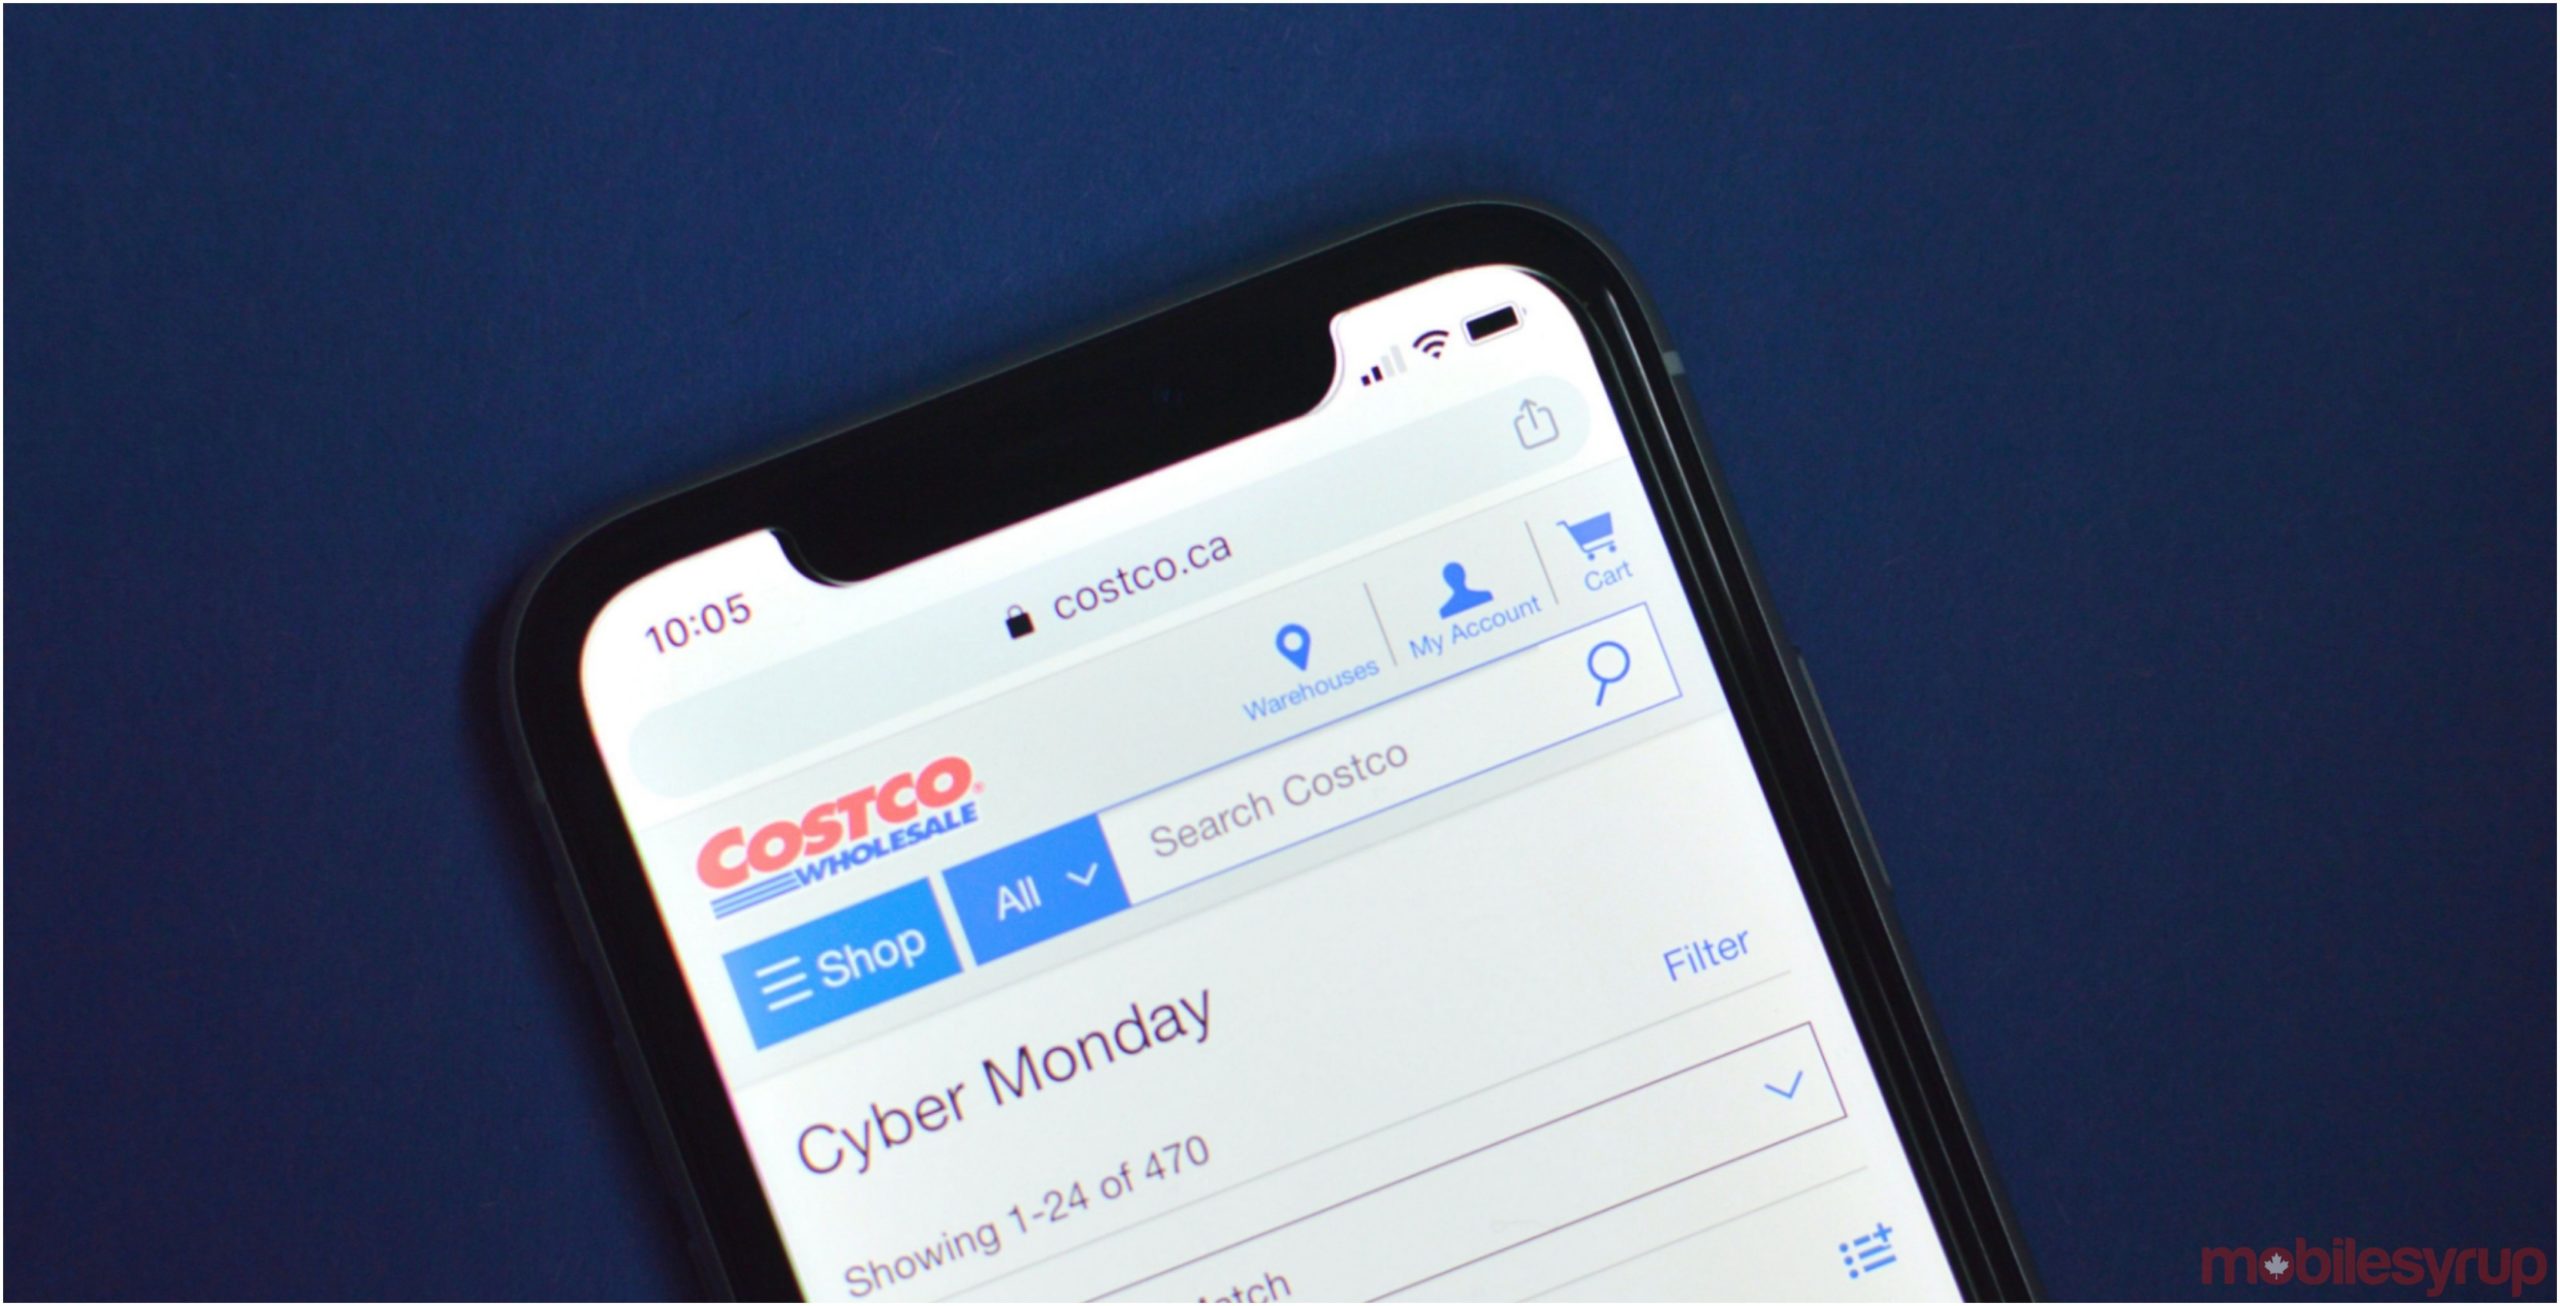 Costco Reveals Cyber Monday Deals On Tech Products